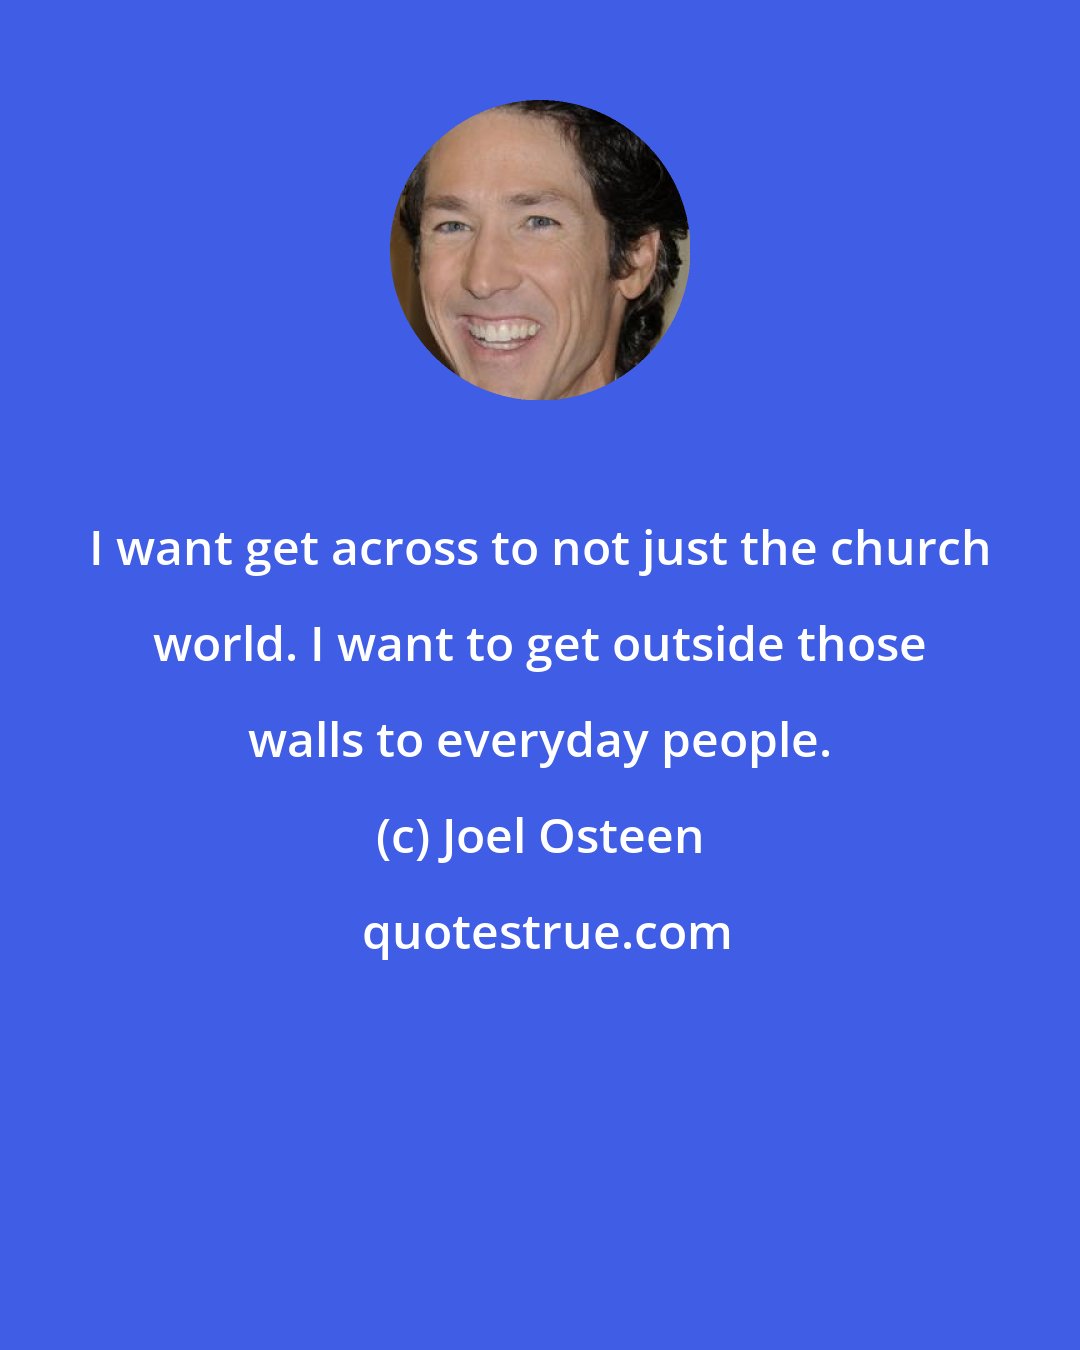 Joel Osteen: I want get across to not just the church world. I want to get outside those walls to everyday people.